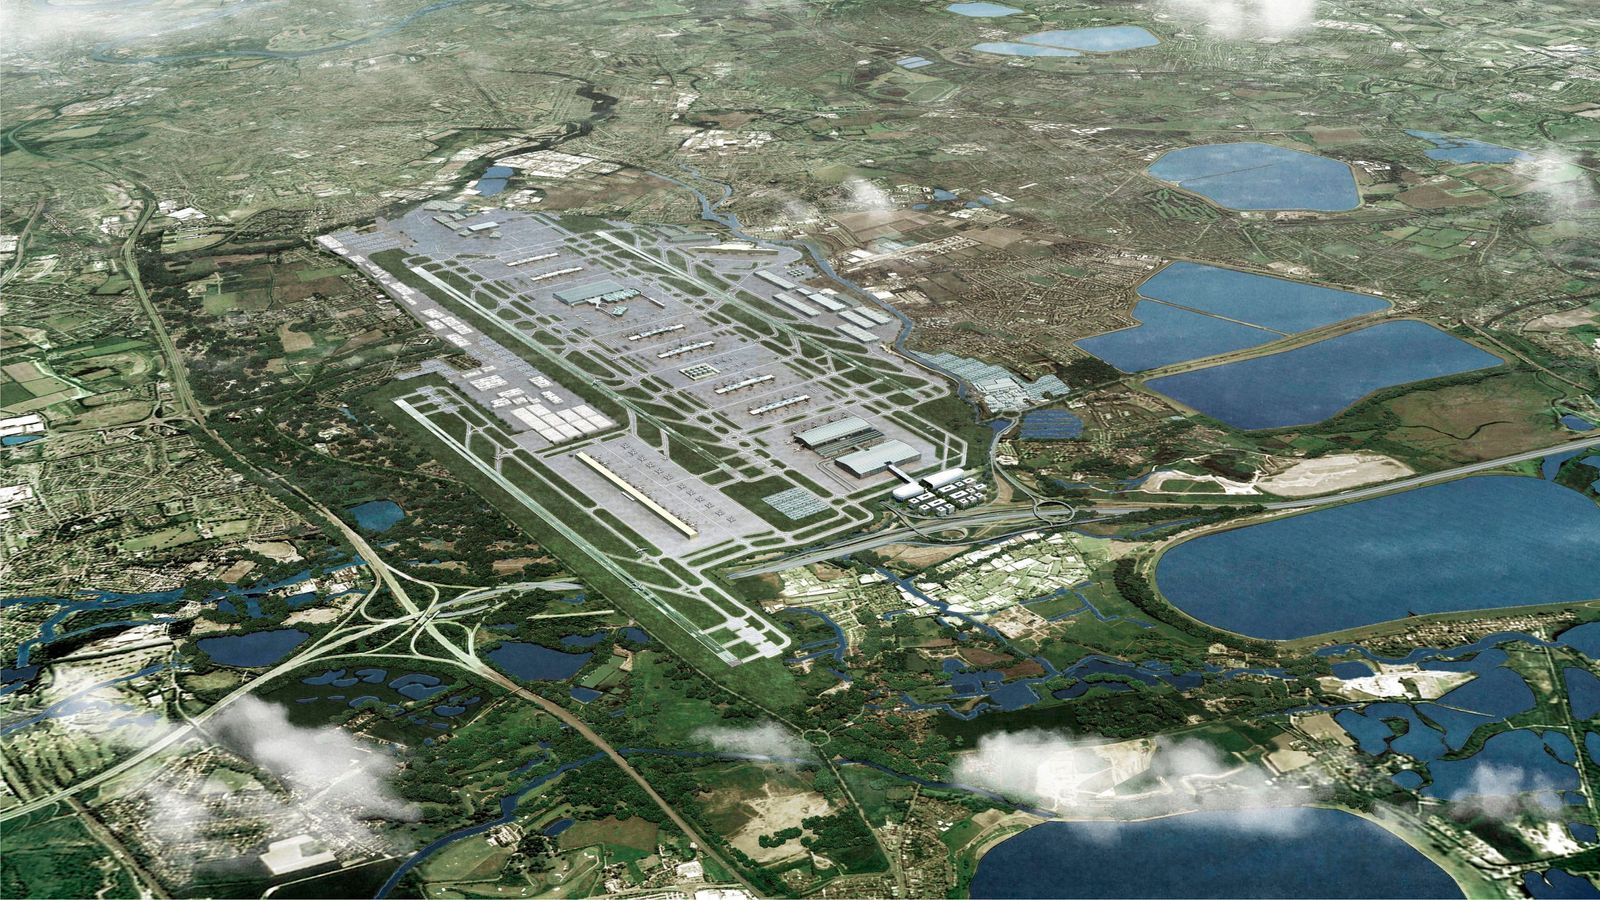 Controversial Heathrow expansion gets government go-ahead